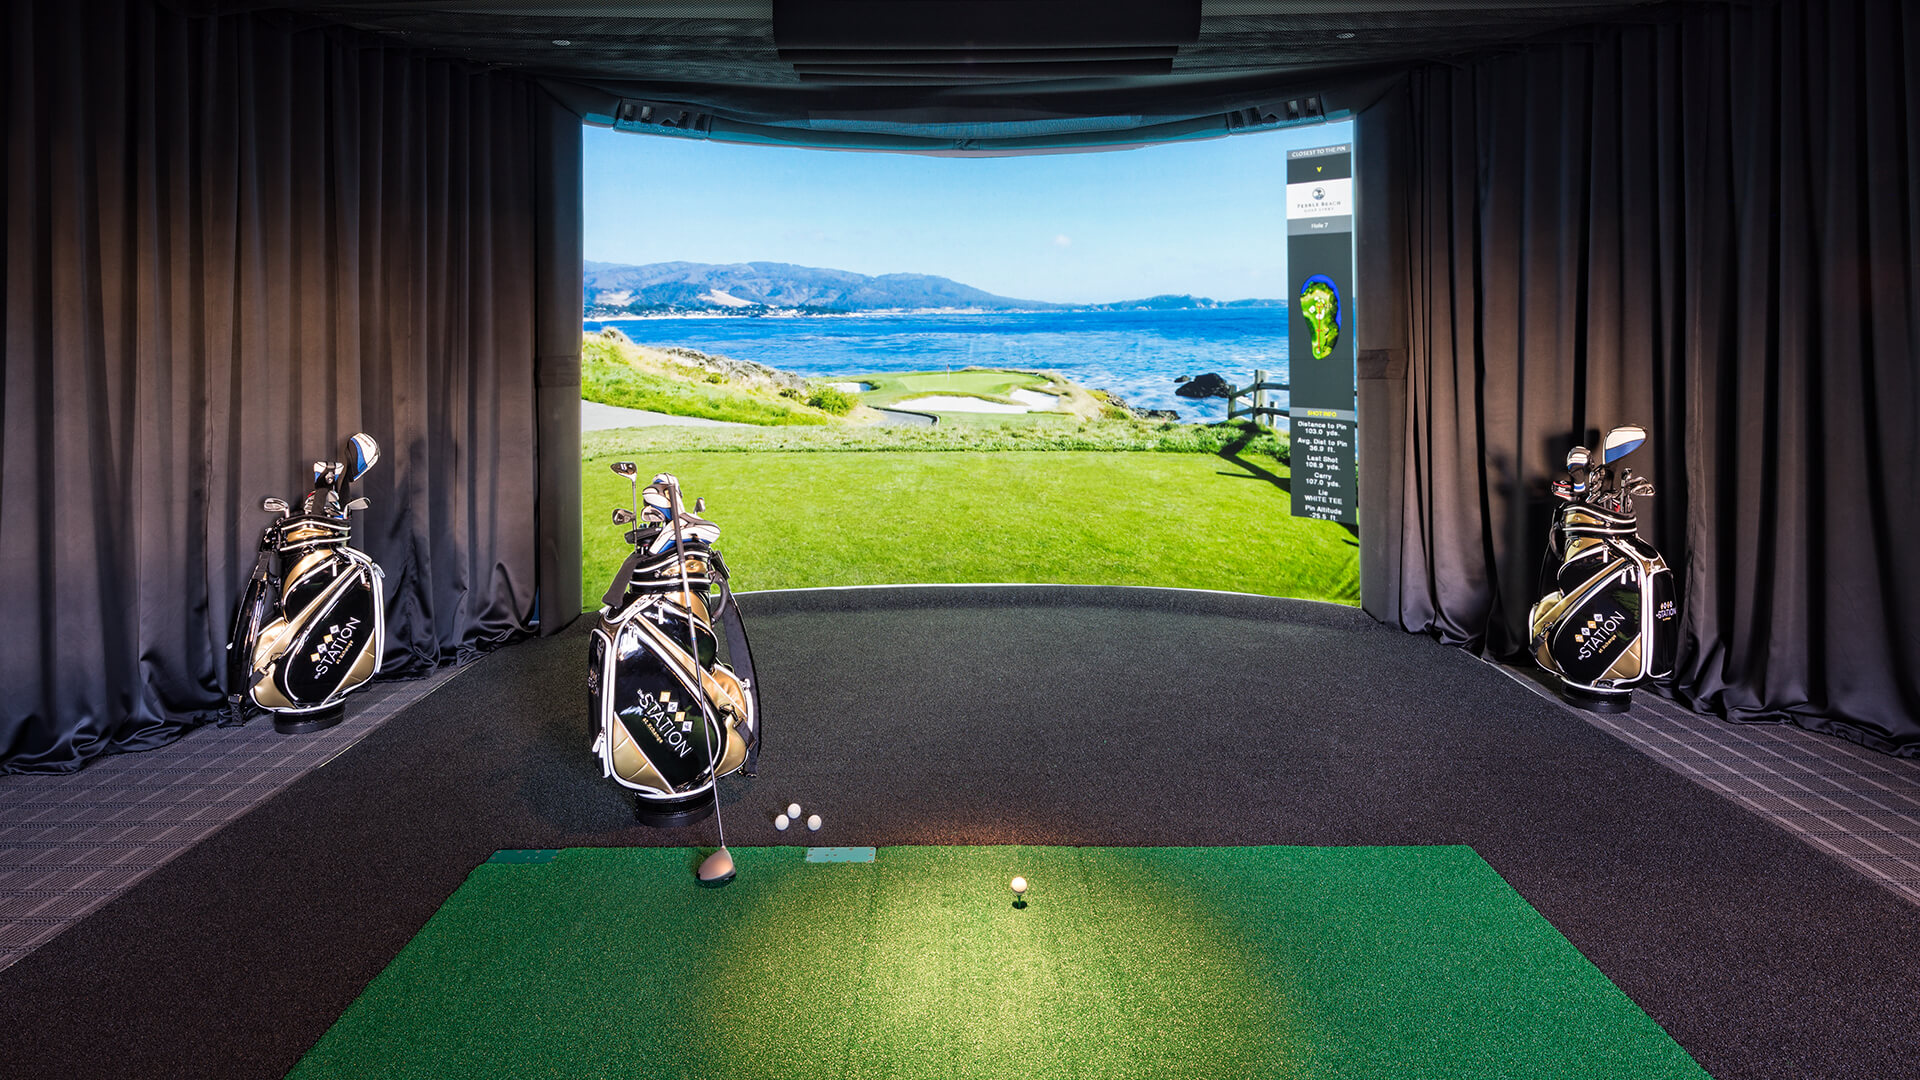 HD gold simulator with access to private lessons from golf professionals